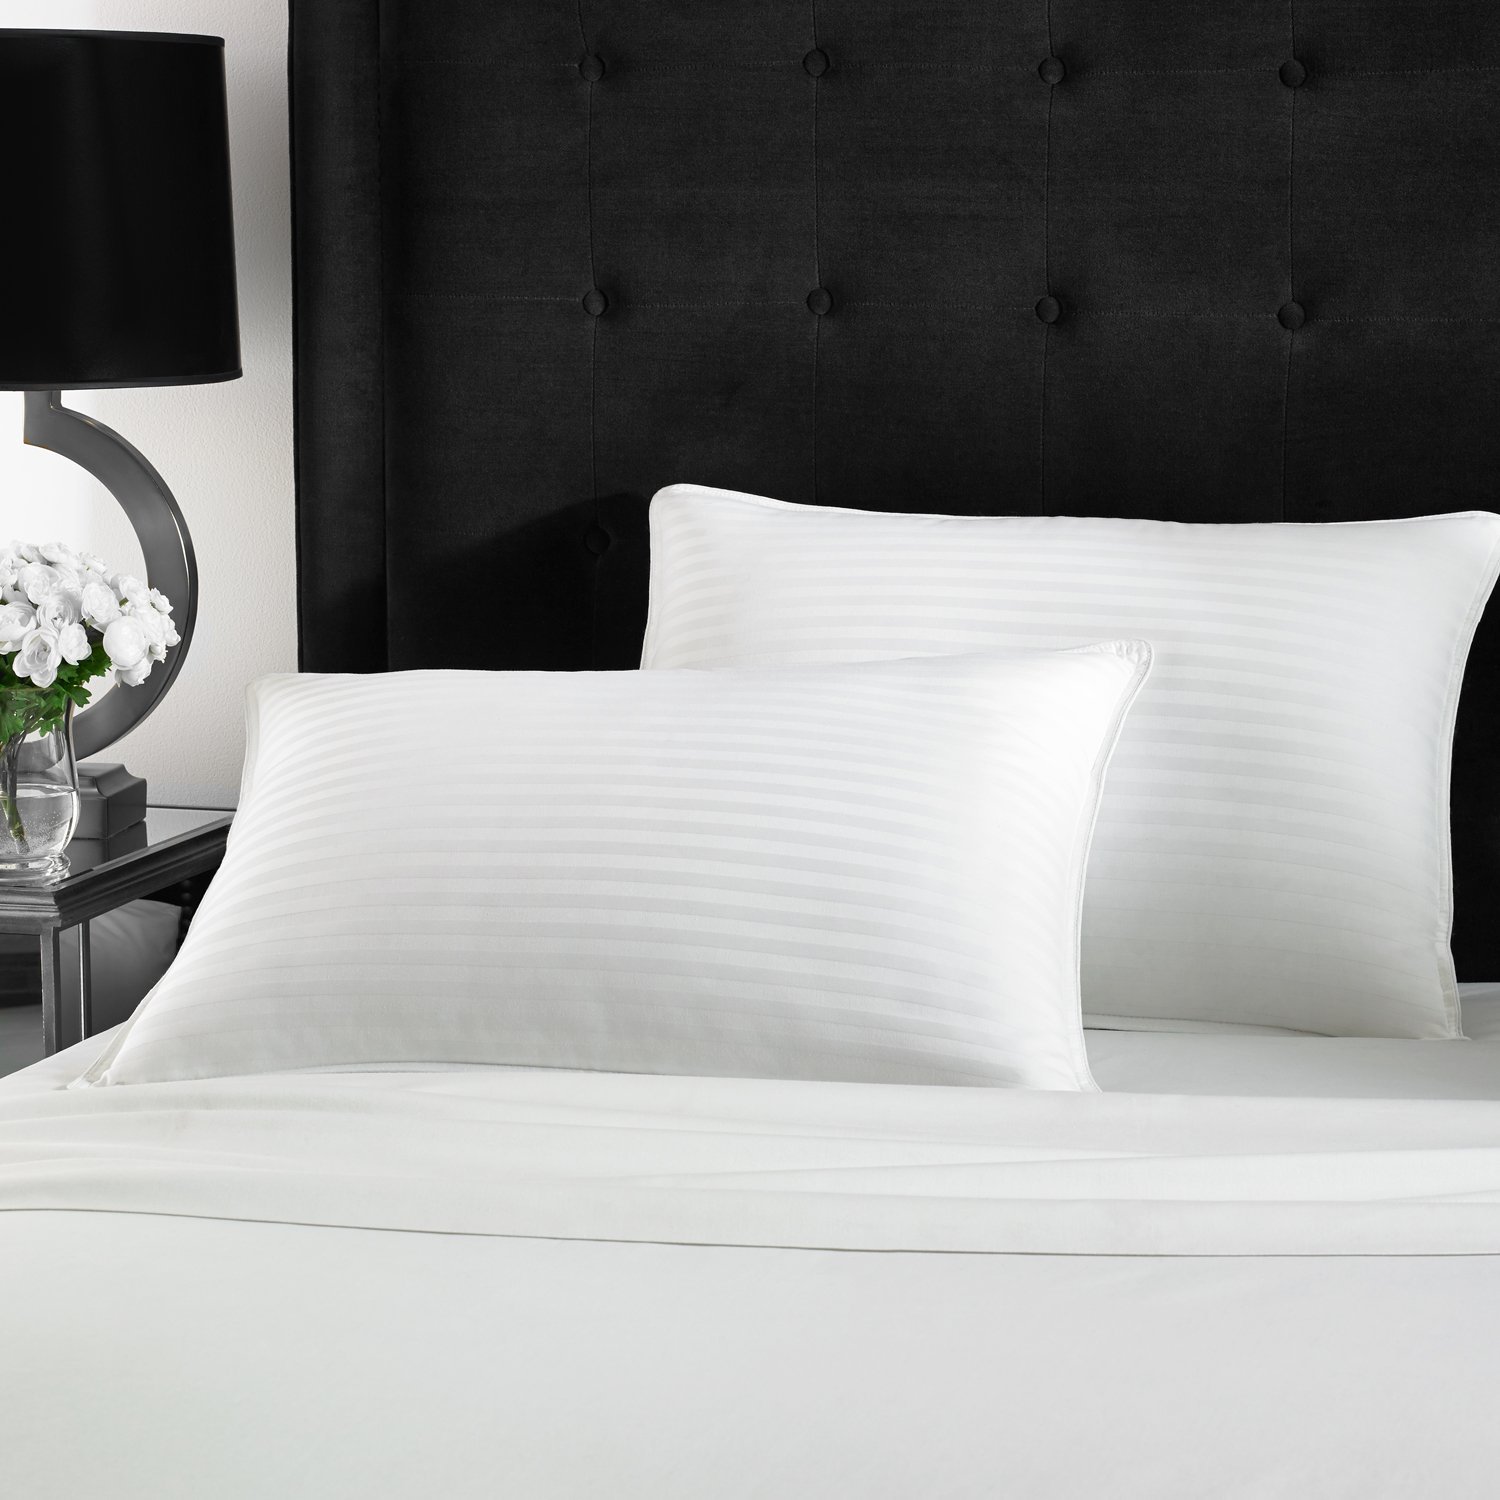 How to Use Beckham Hotel Collection Cooling Gel Pillows? 